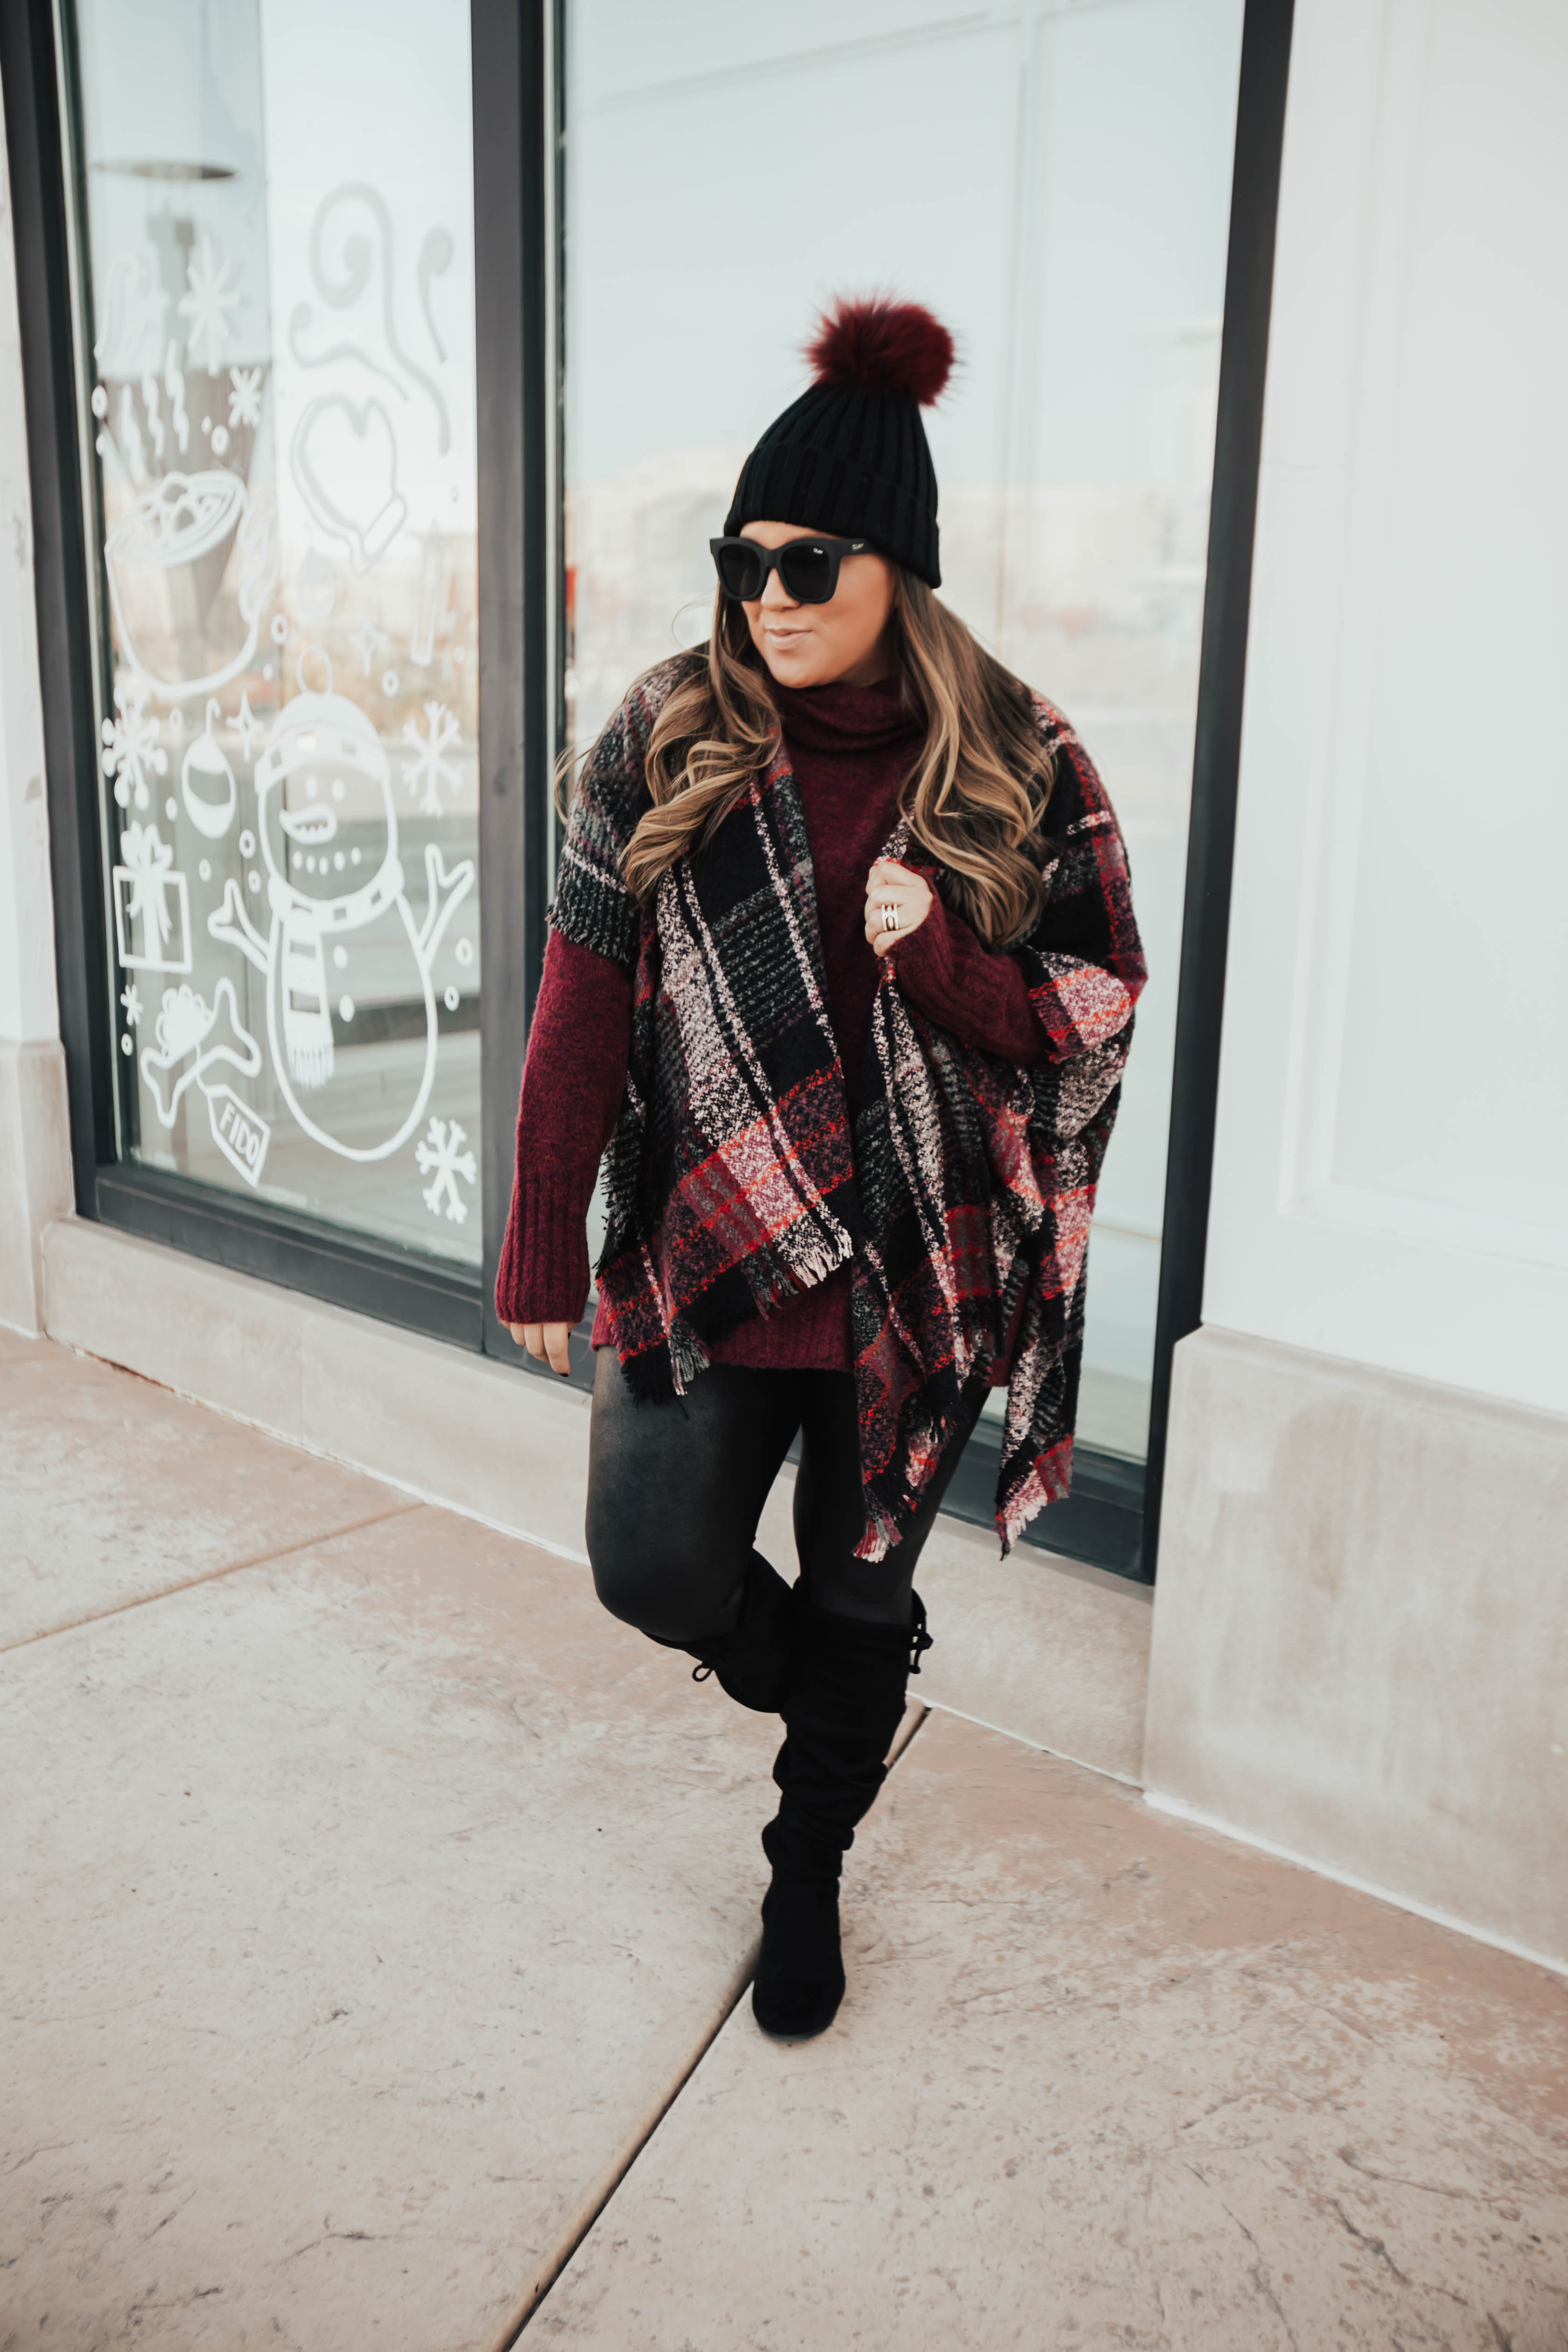 Reno blogger Ashley Zeal from Two Peas in a Prada shares her November Best Sellers. She is going over all of the best selling items that you all bought last month!